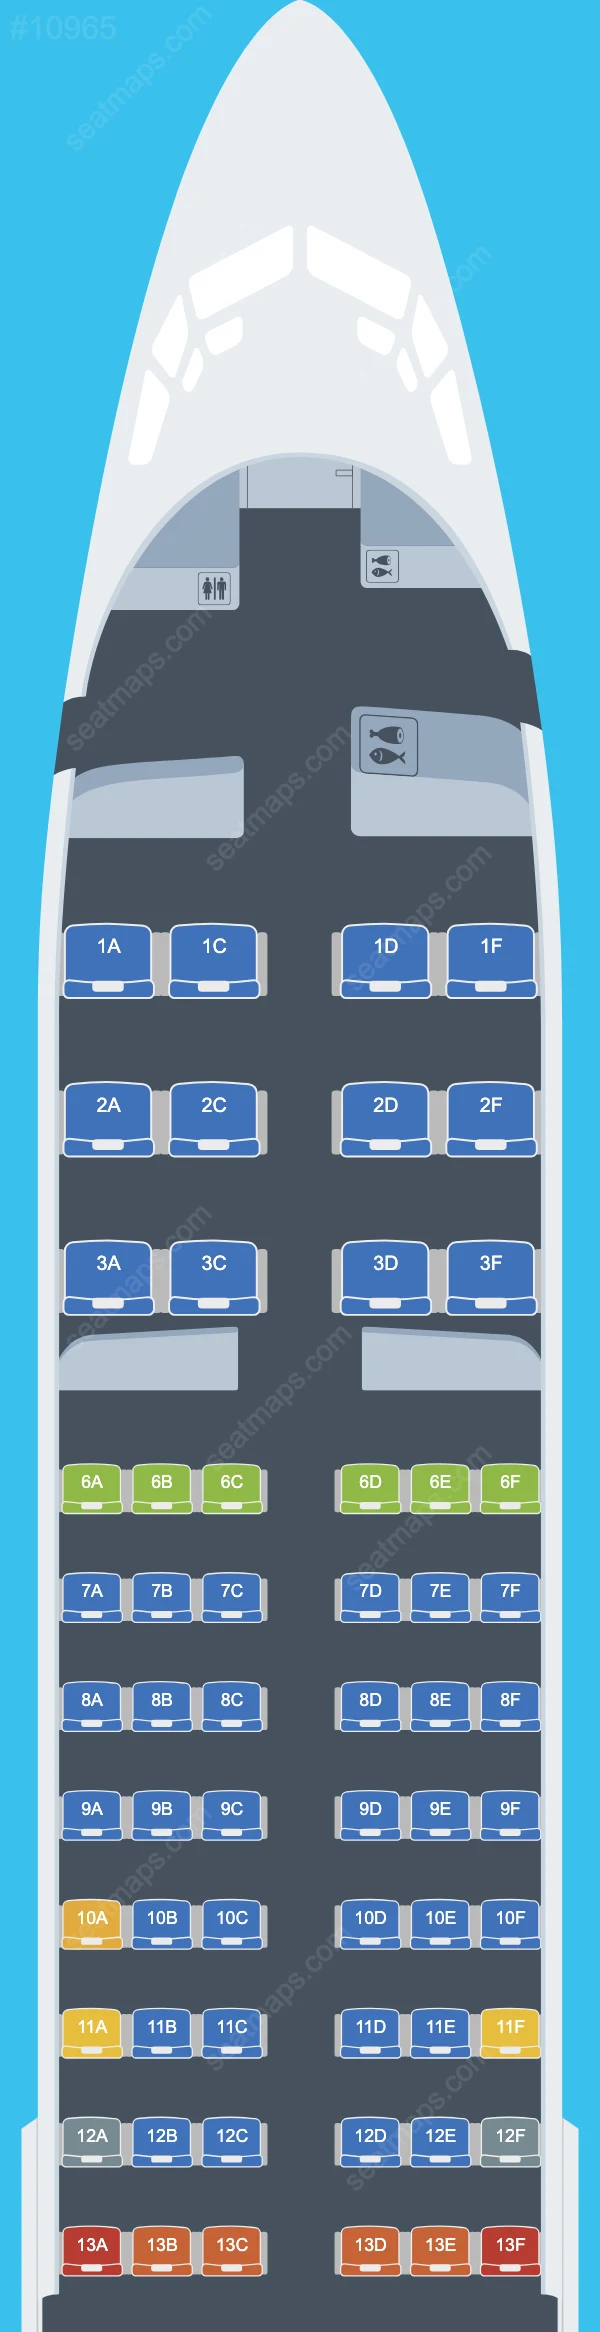 Luxair Boeing 737 Seat Maps 737-800